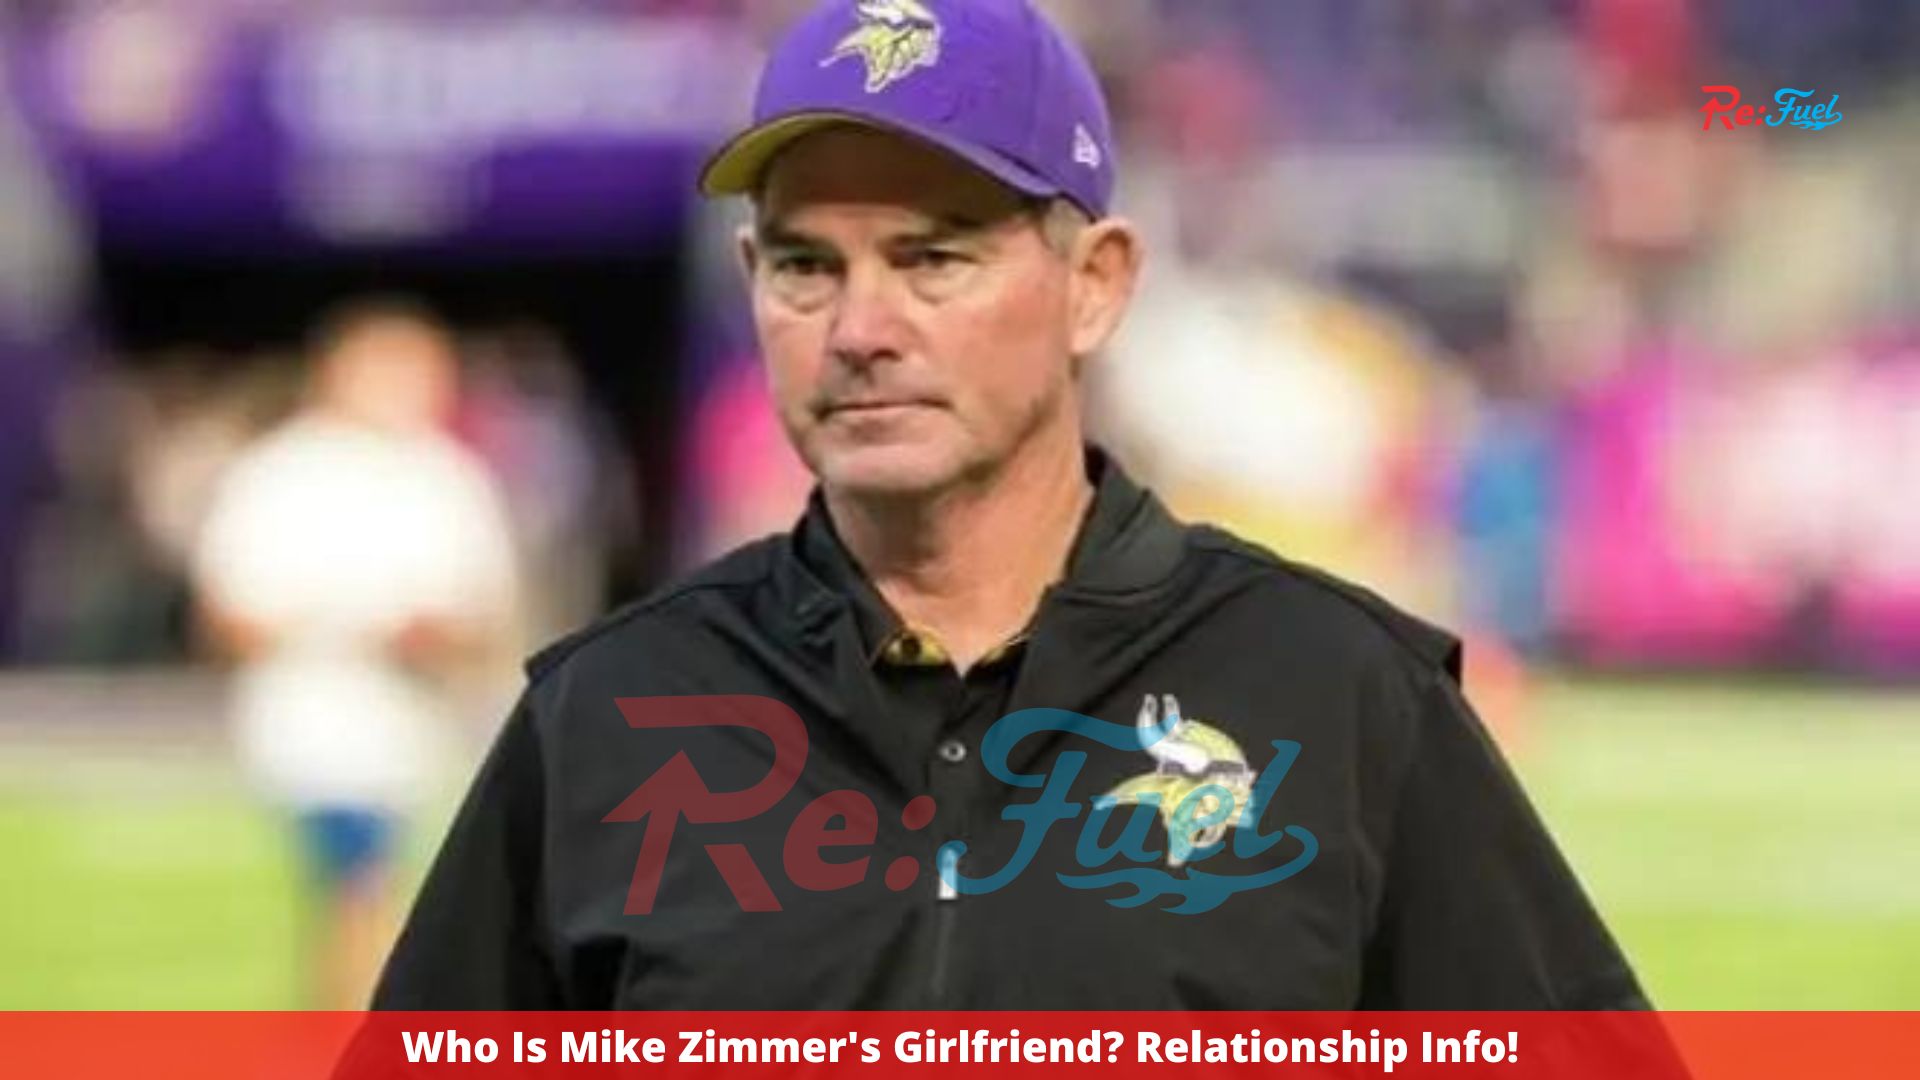 Who Is Mike Zimmer's Girlfriend? Relationship Info!